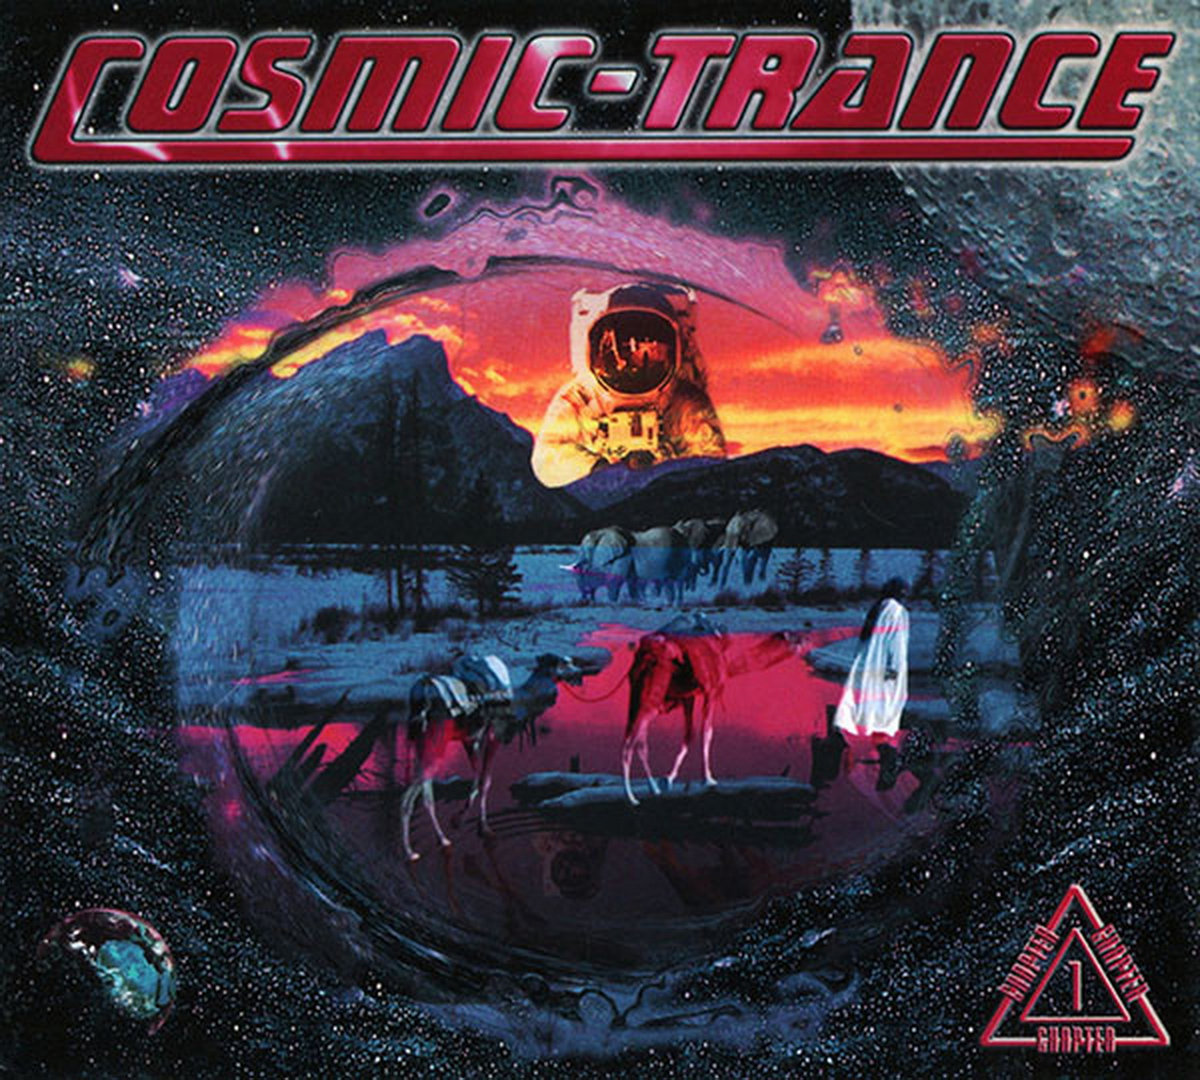 Cosmic-Trance - Chapter 1 (1997)